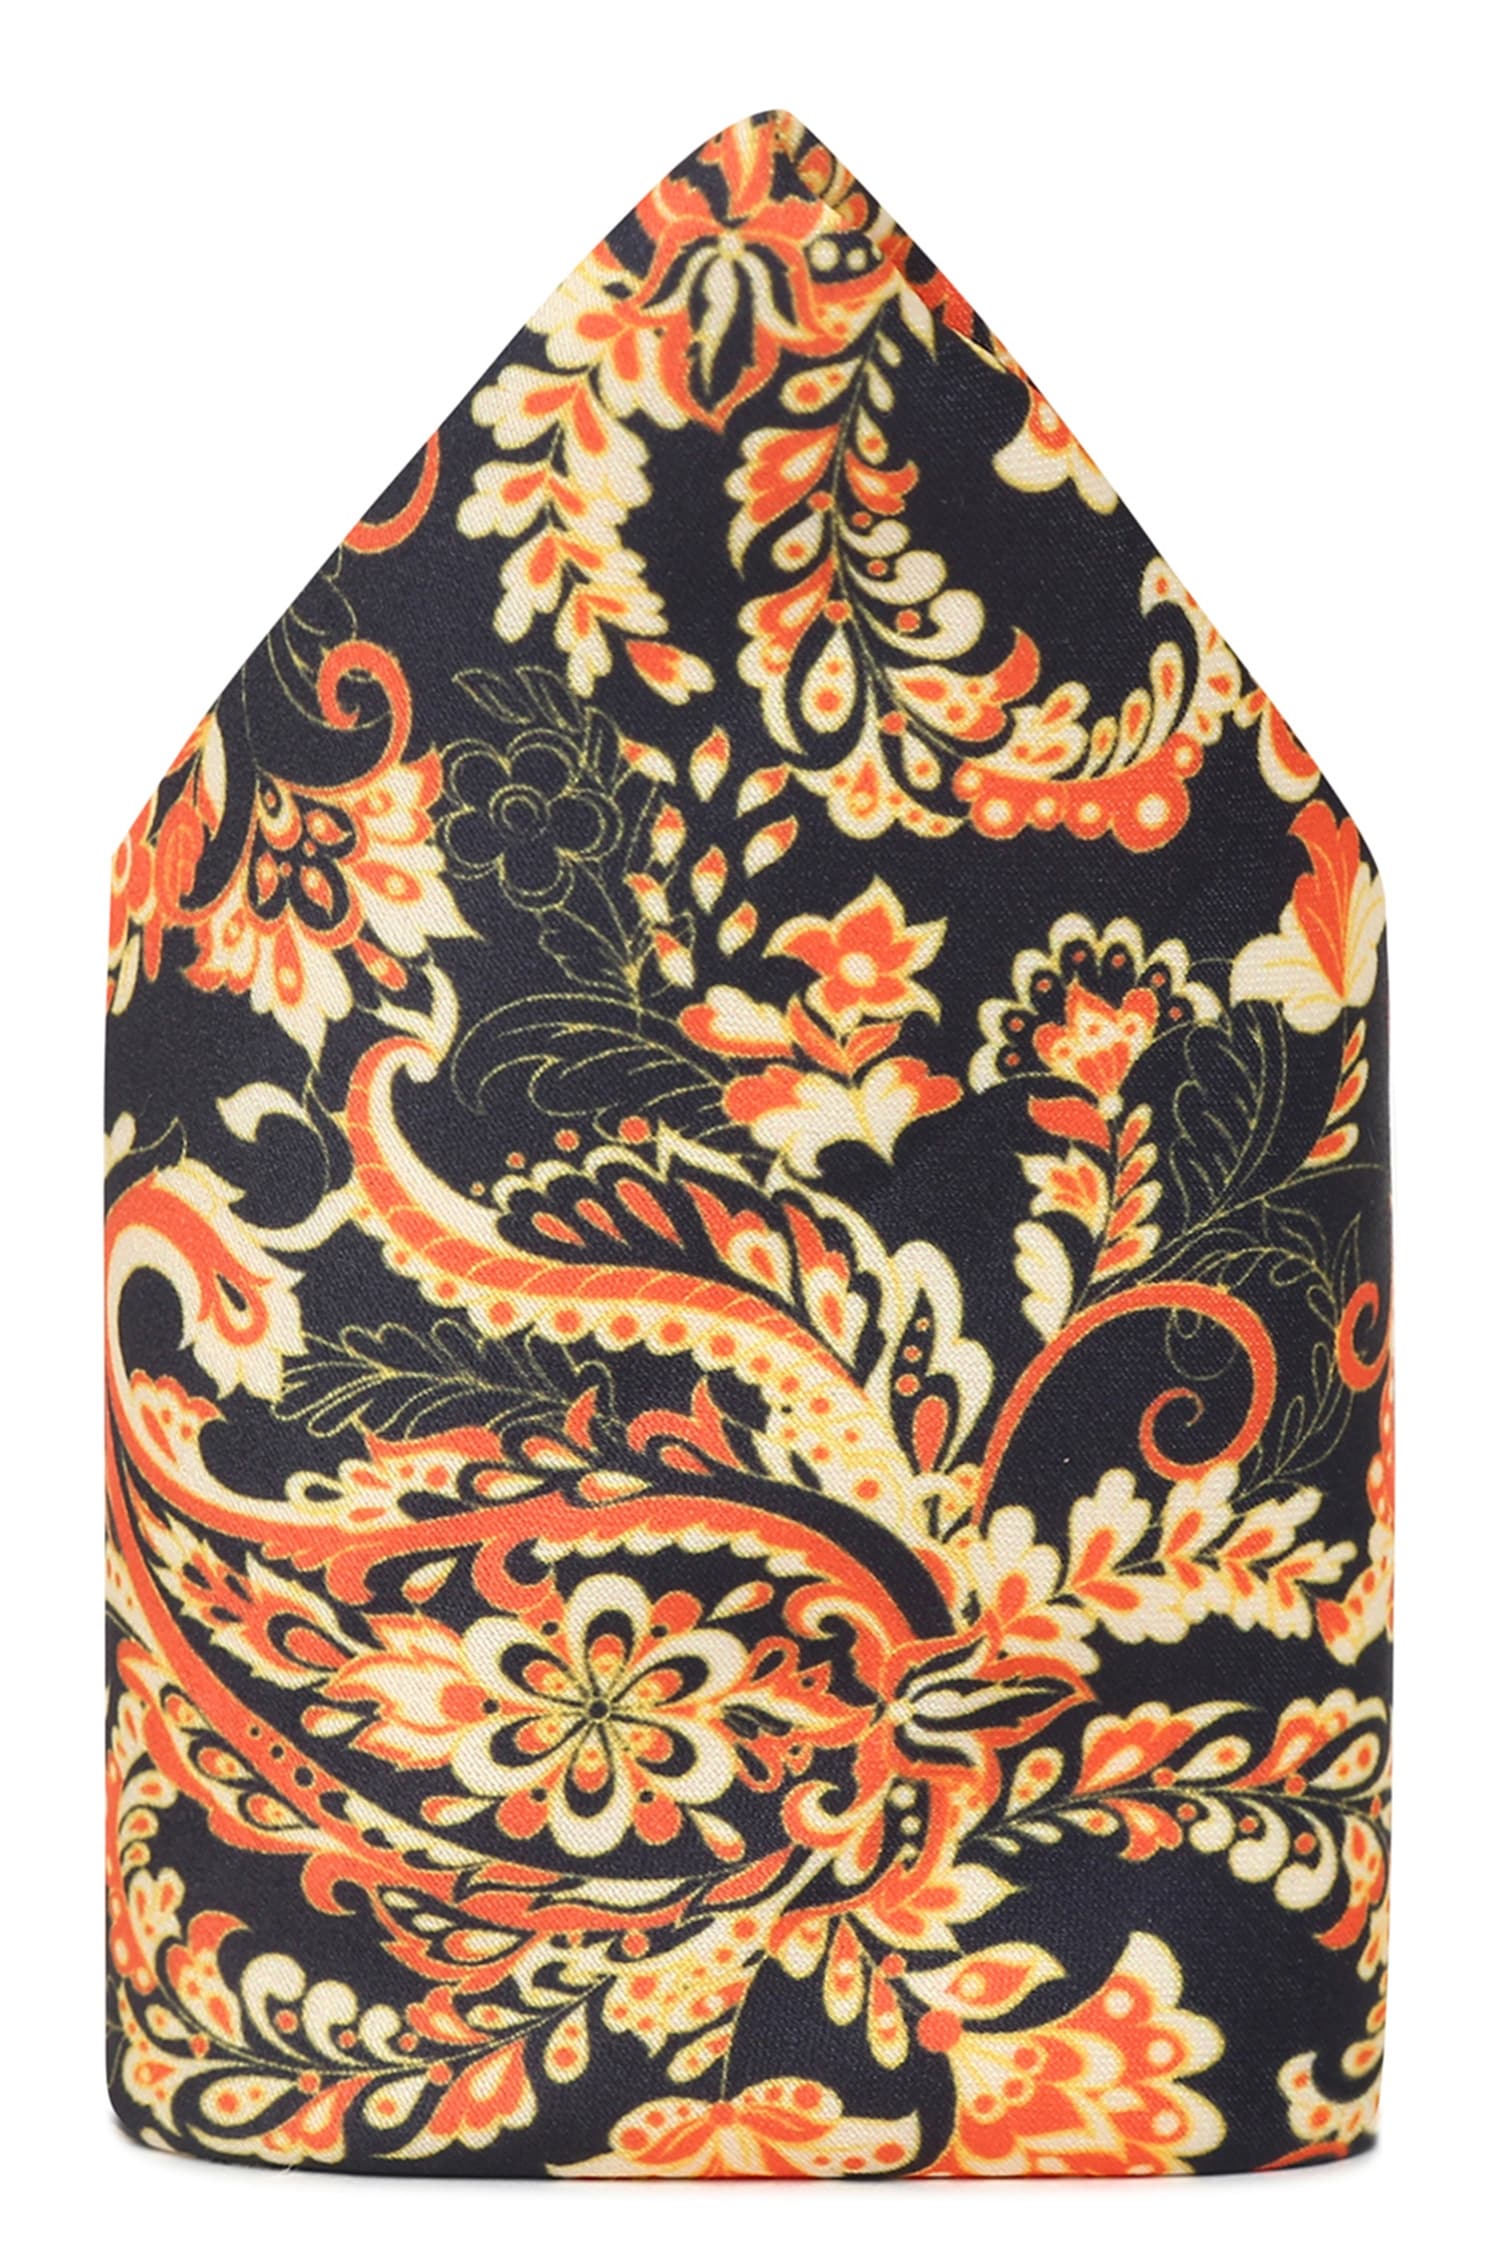 Tossido Multi Color Printed Paisley And Floral Pattern Pocket Square